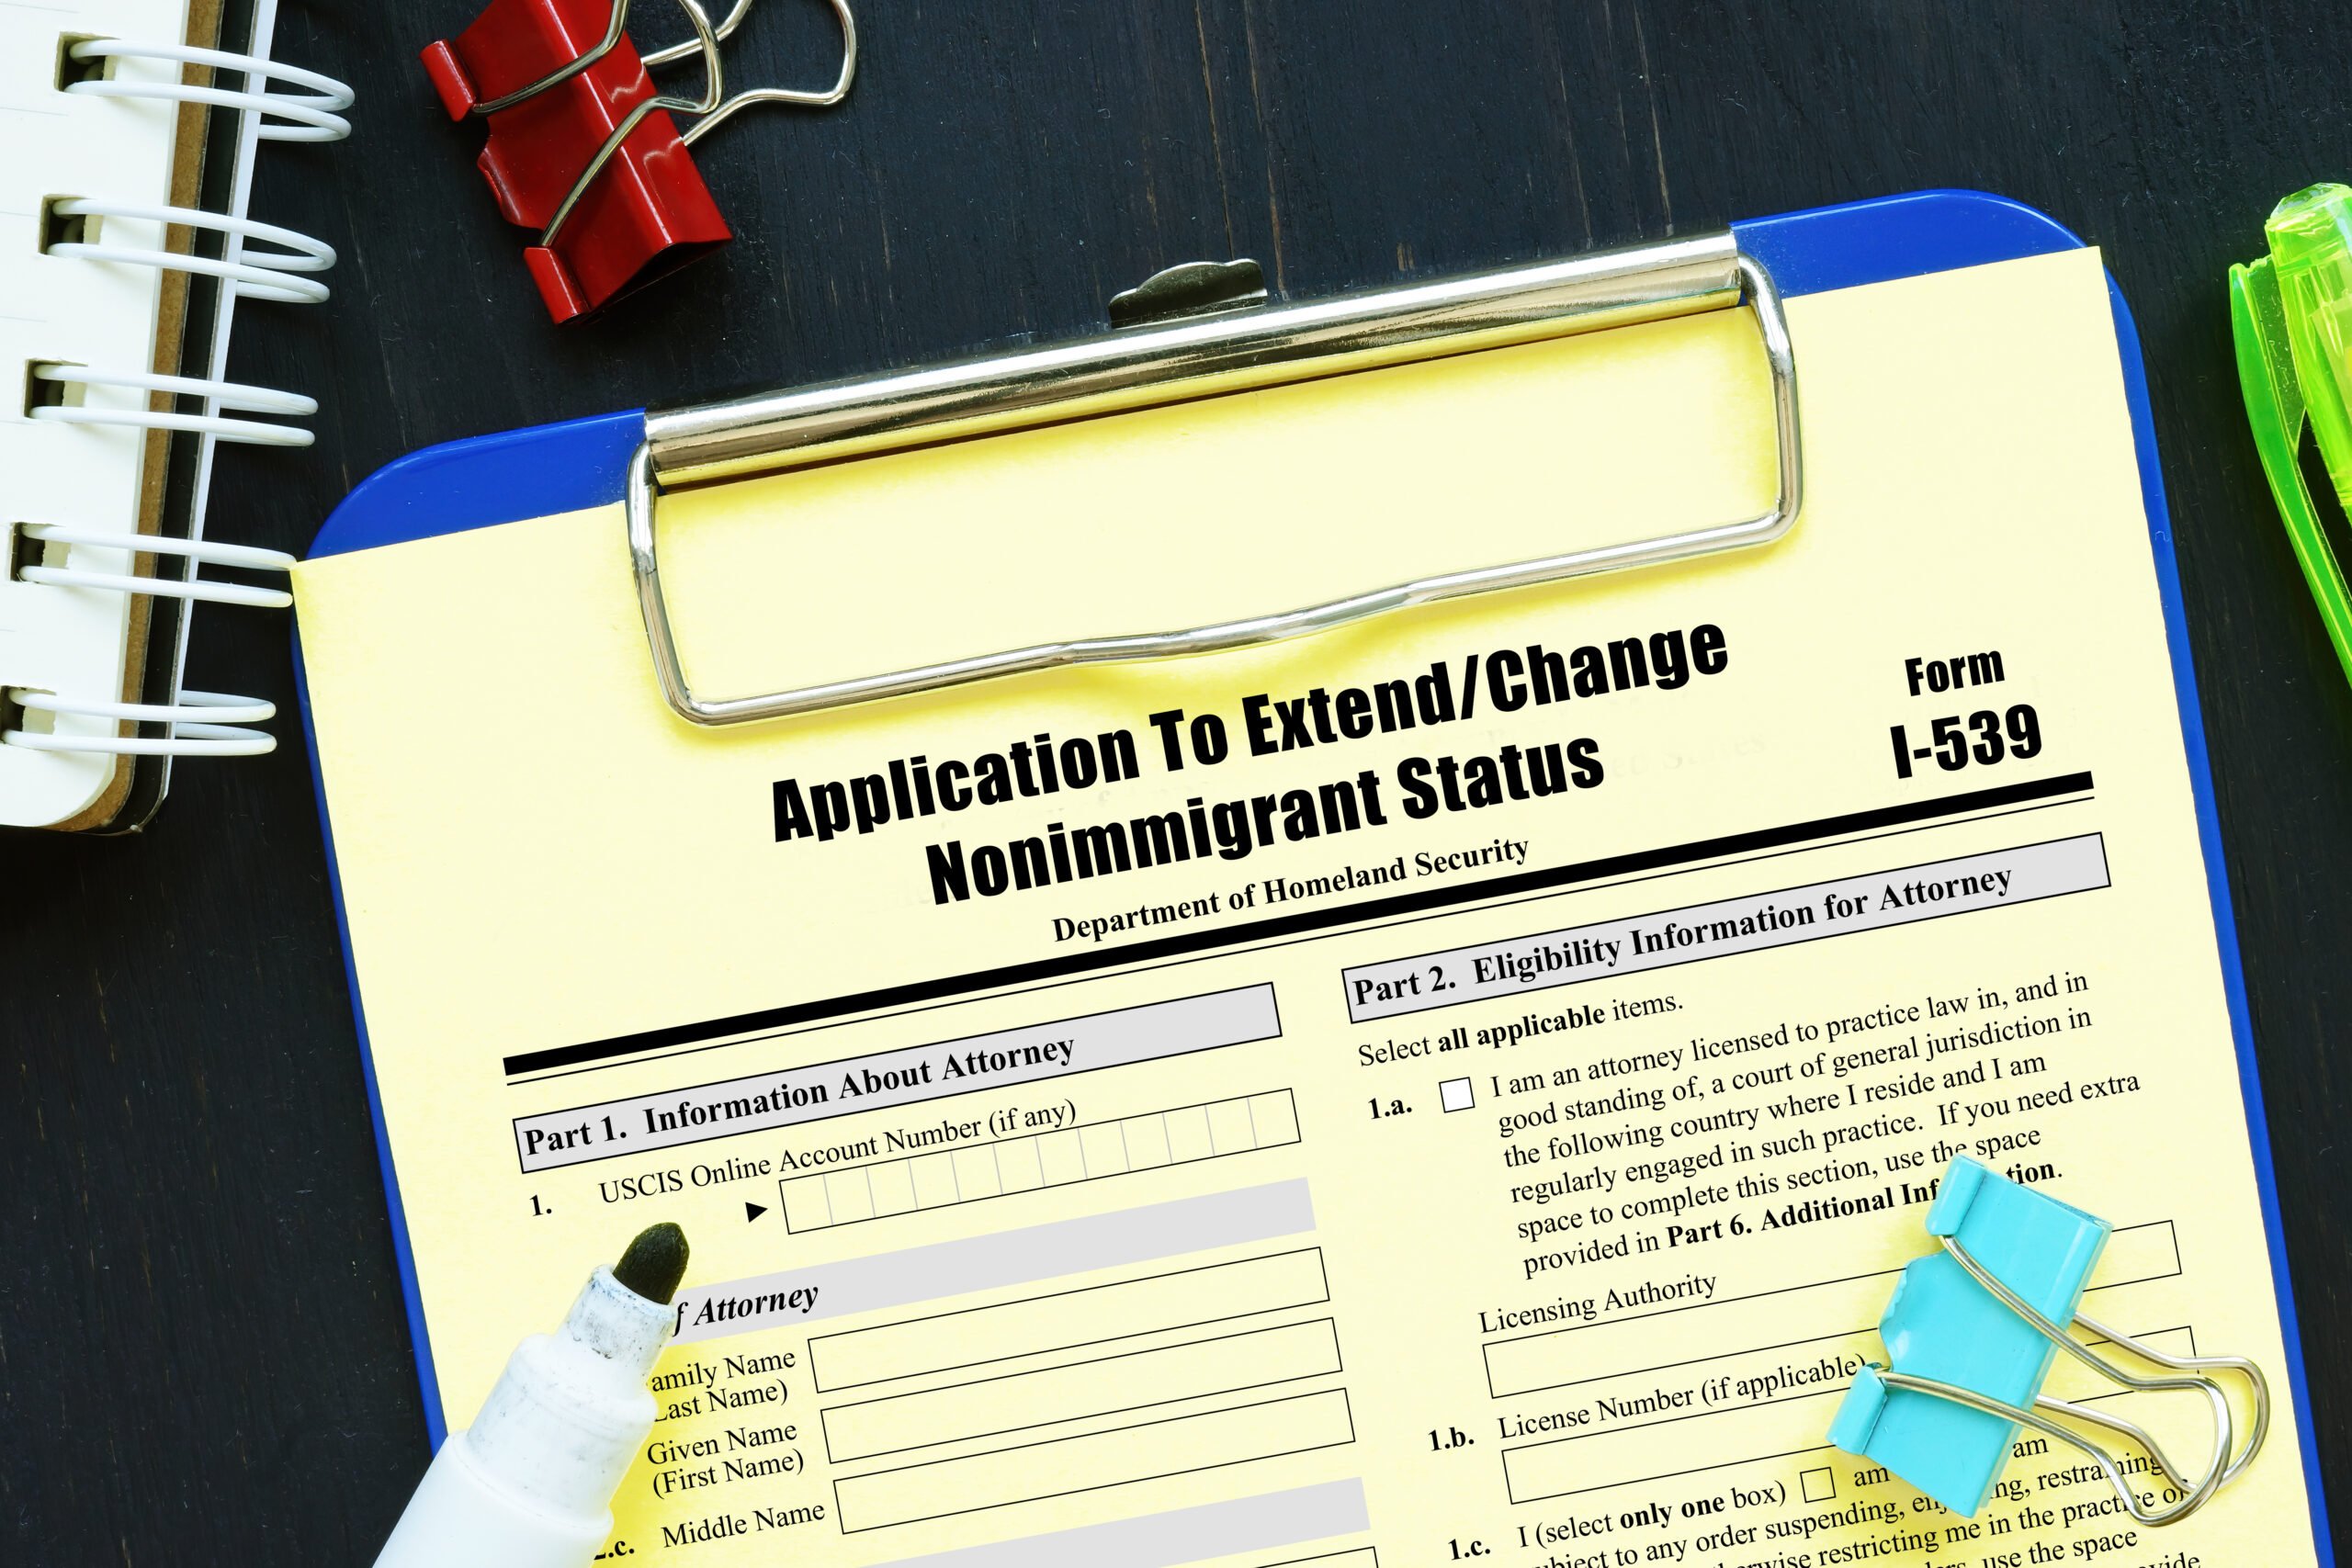 Applying for an Extension of a U.S. Visa or Change of Status